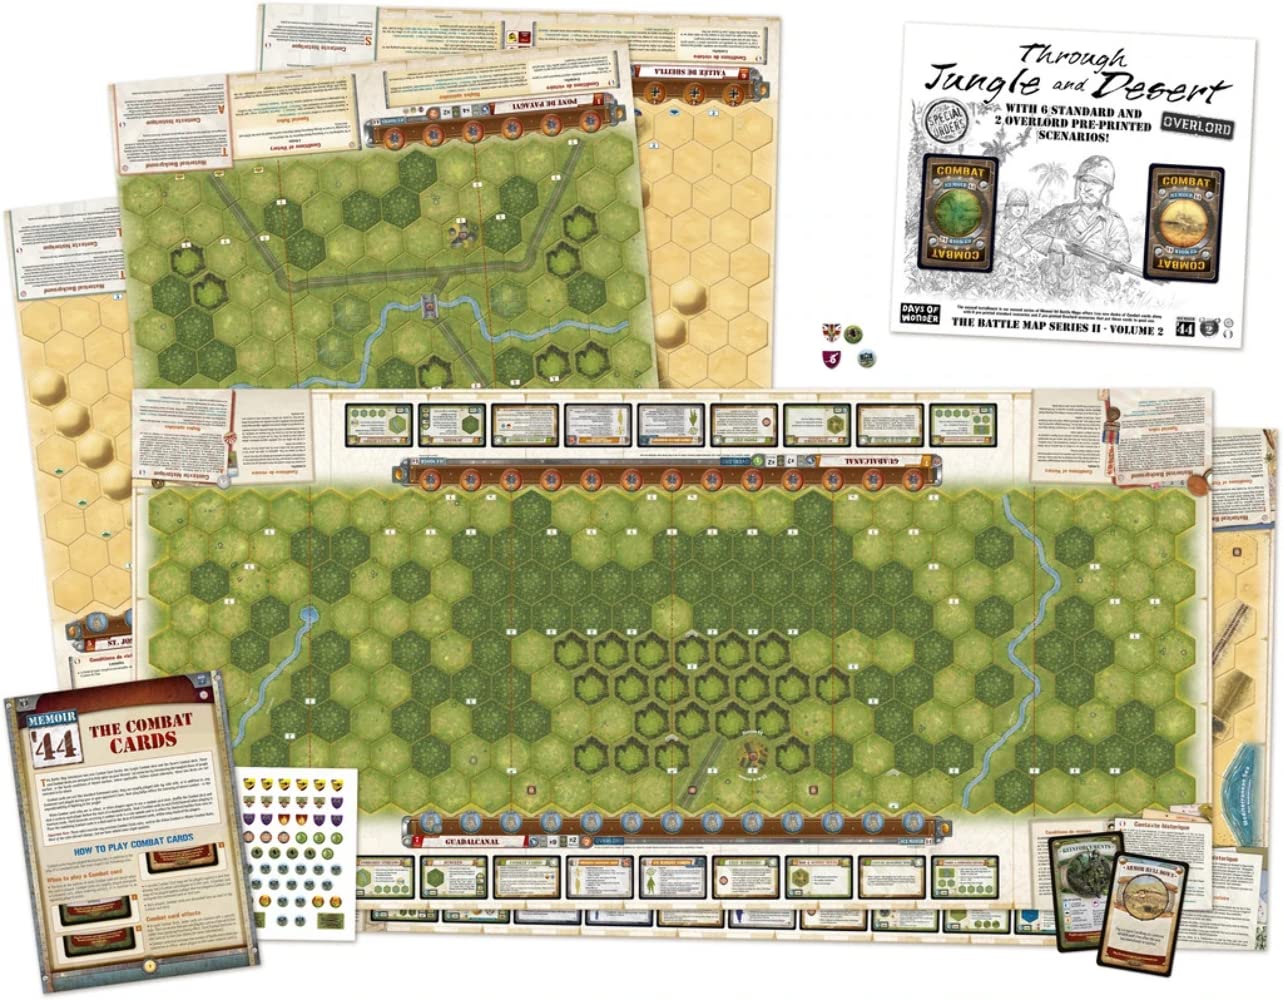 Days of Wonder , Memoir '44 OP6 Battle Map - Through Desert and Jungle, Board Game, Ages 8+, 2-8 Players, 30-90 Minutes Playing Time